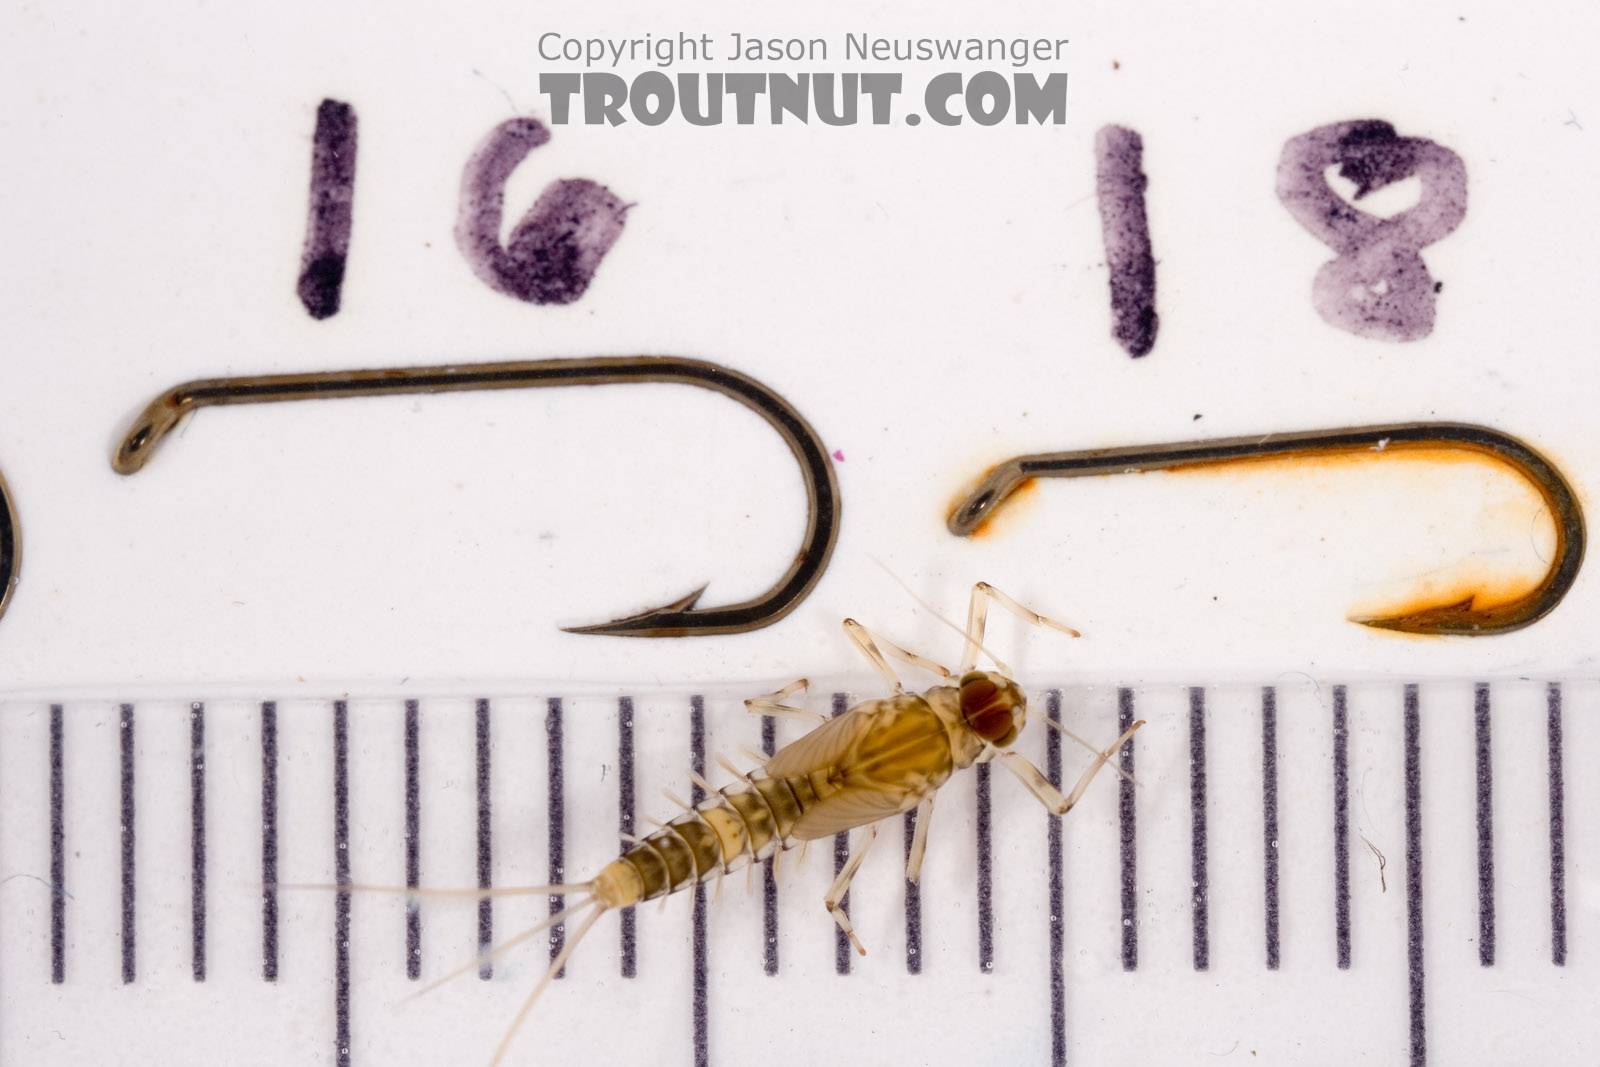 Baetis (Blue-Winged Olives) Mayfly Nymph from Mystery Creek #62 in New York